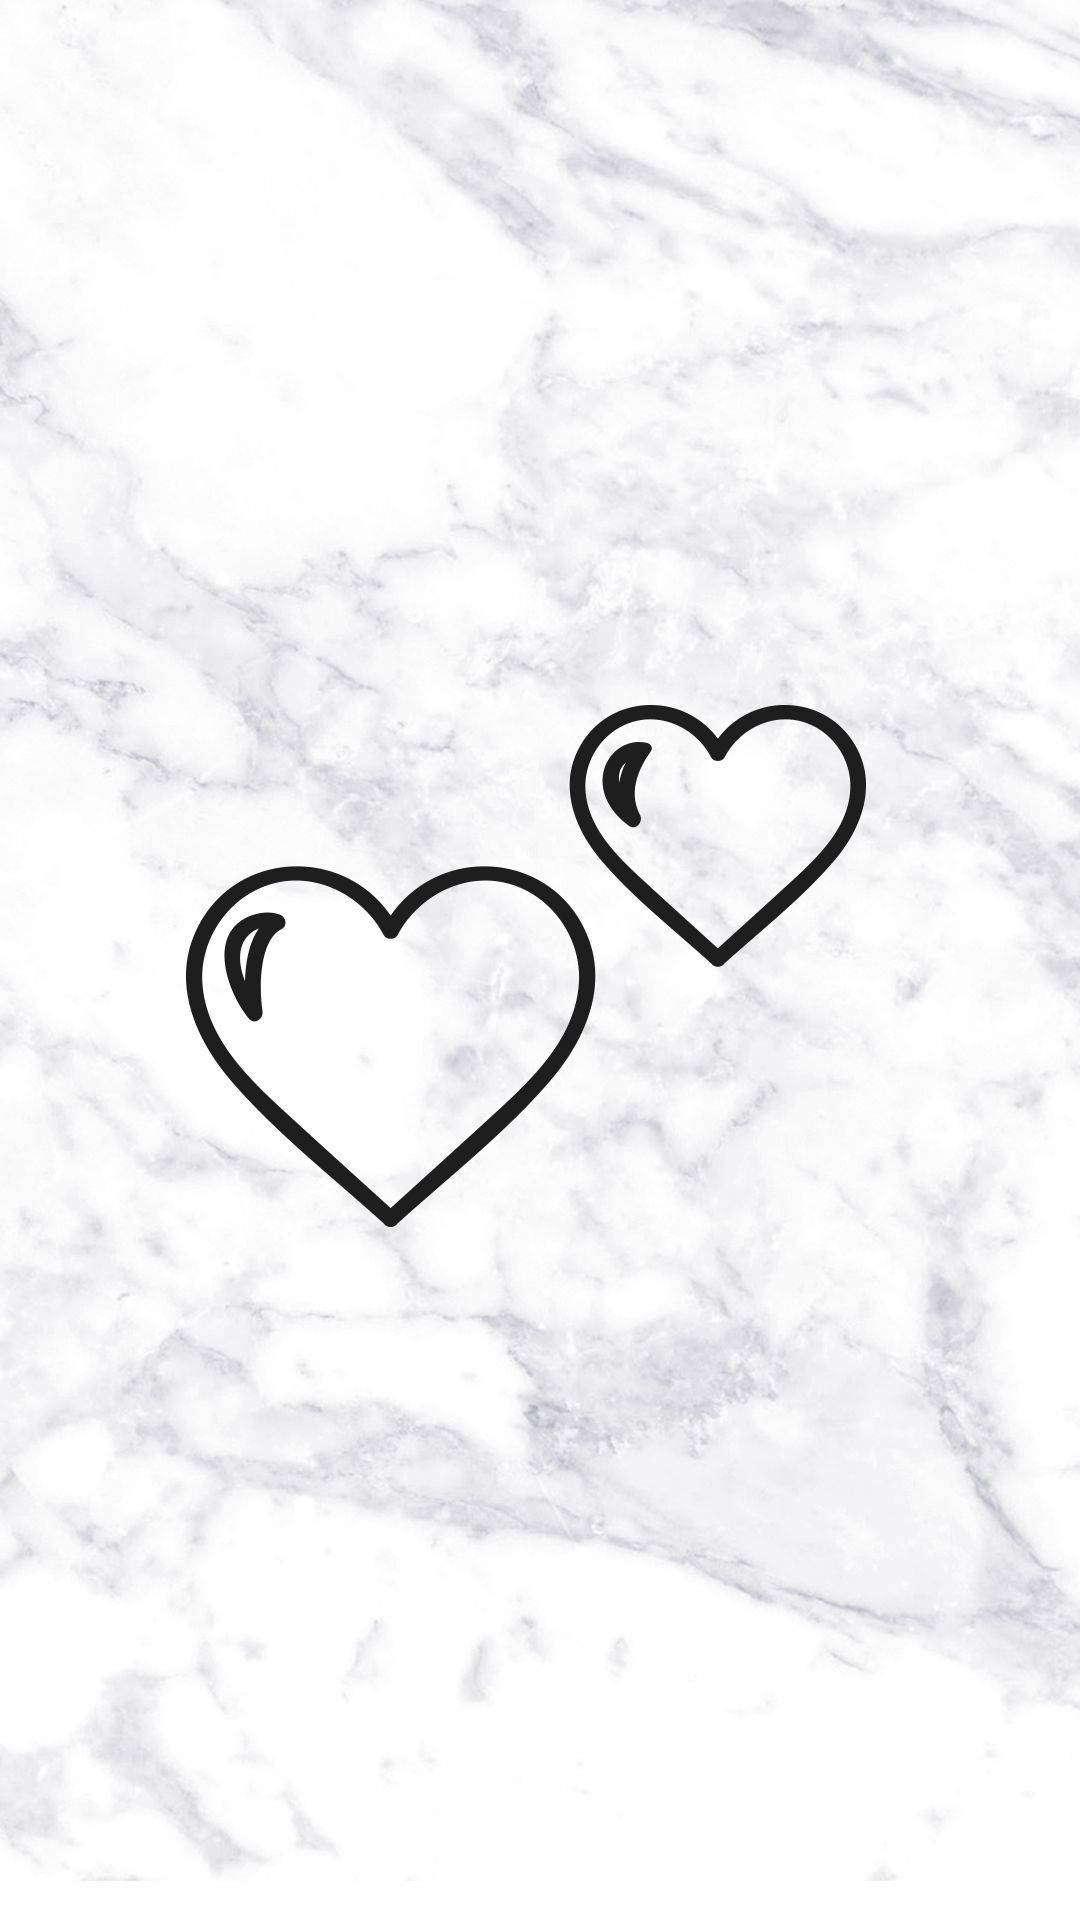 Two Hearts Black White Marble Iphone Background